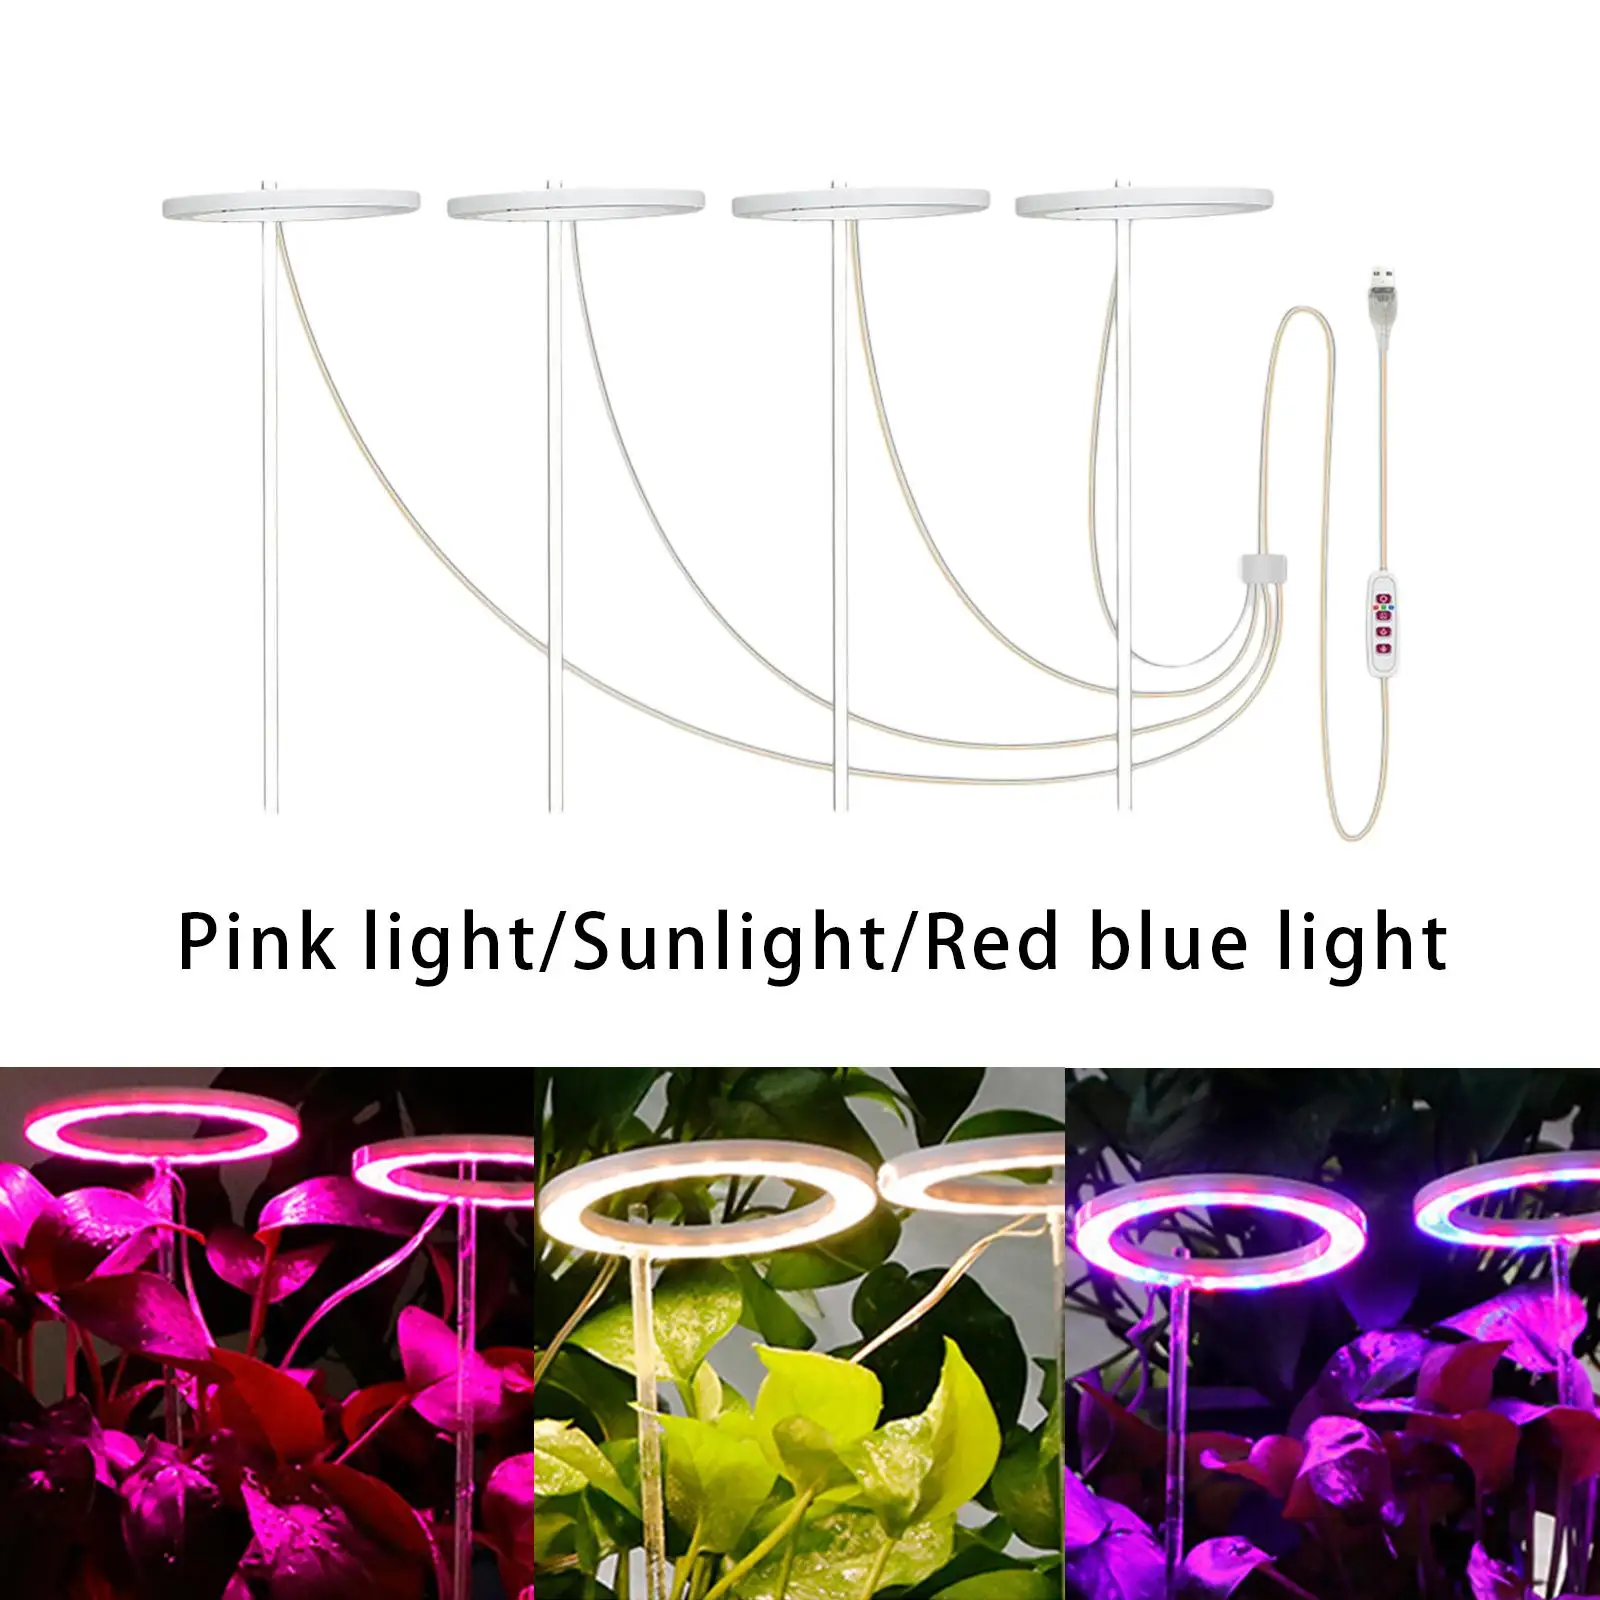 LED Grow Light 4 Lights 5 Dimmable Brightness Auto On Off Timing 8 12 16Hrs Full Spectrum Plant Growing Lamp for Plants Flower